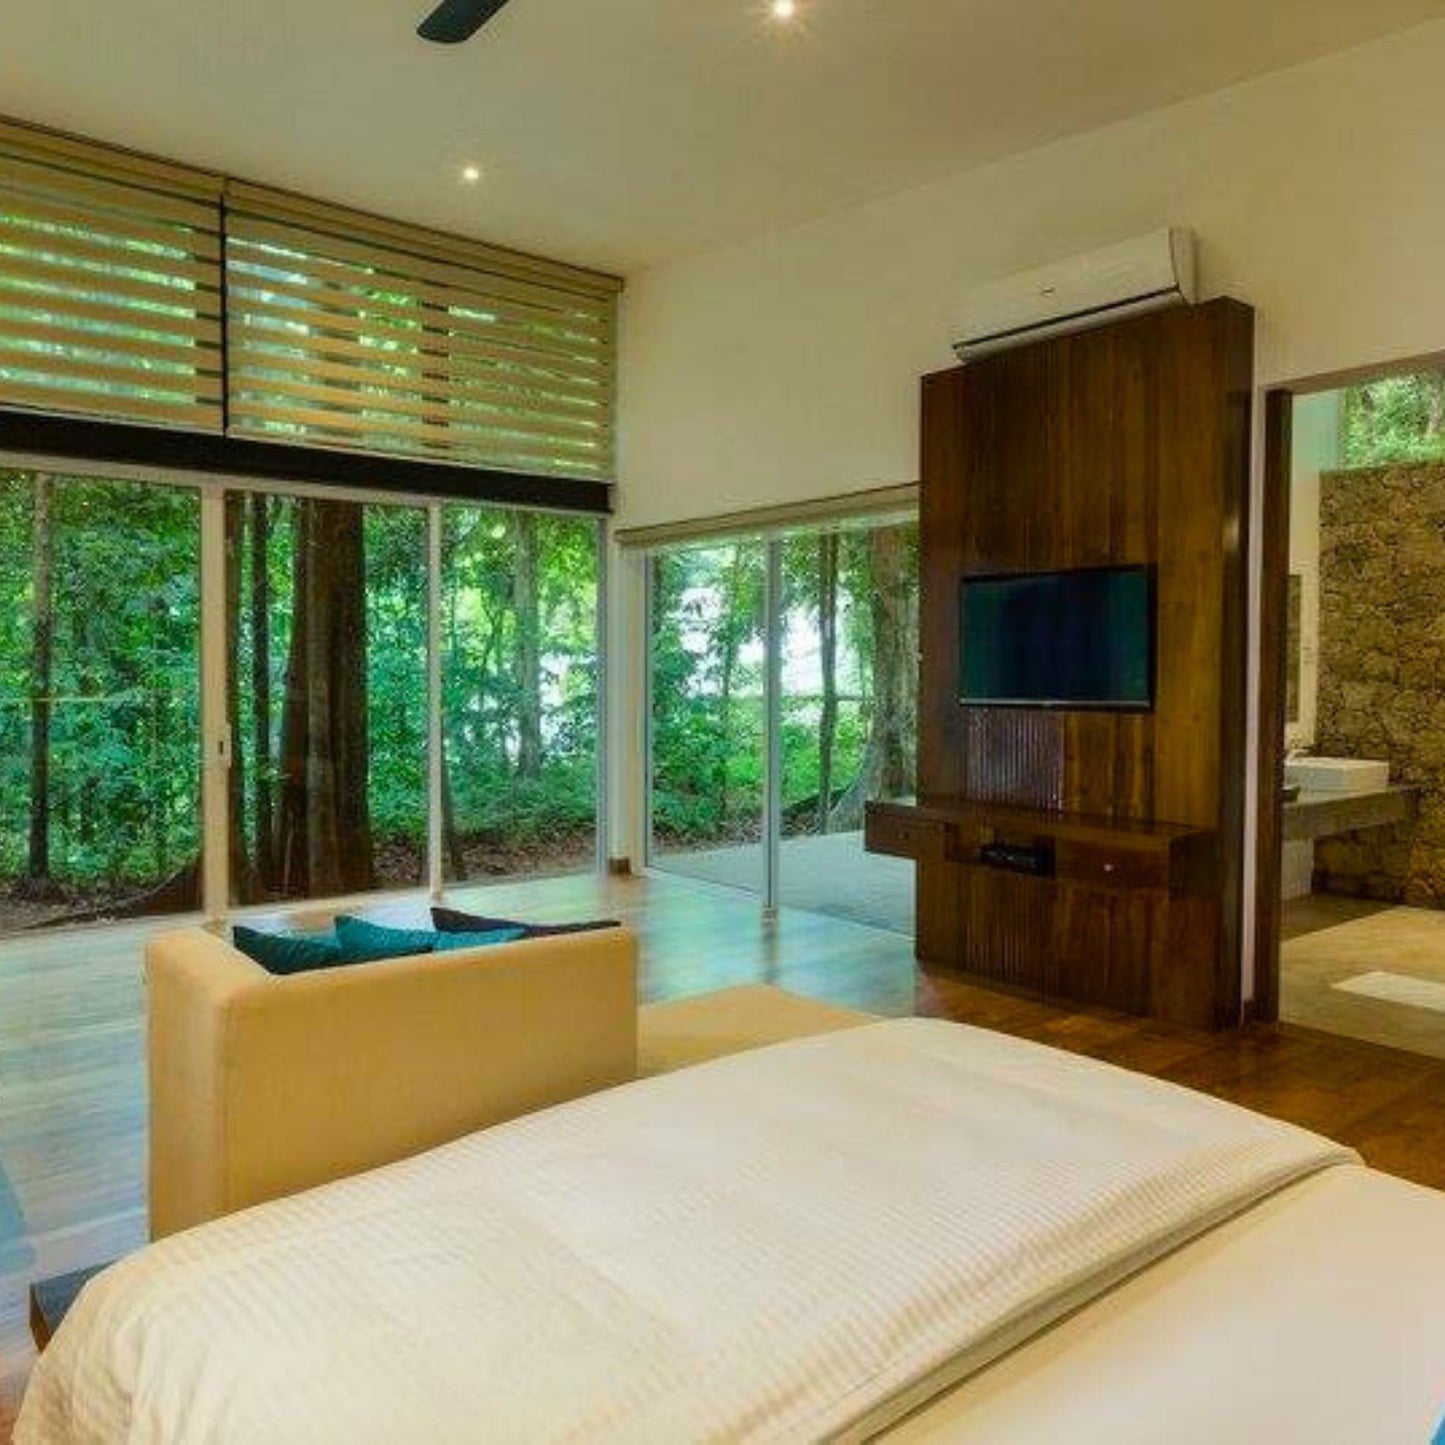 2 or 3 Luxury days with 5-star experience in the middle of a rainforest: luxury suite + jacuzzi for 2 people